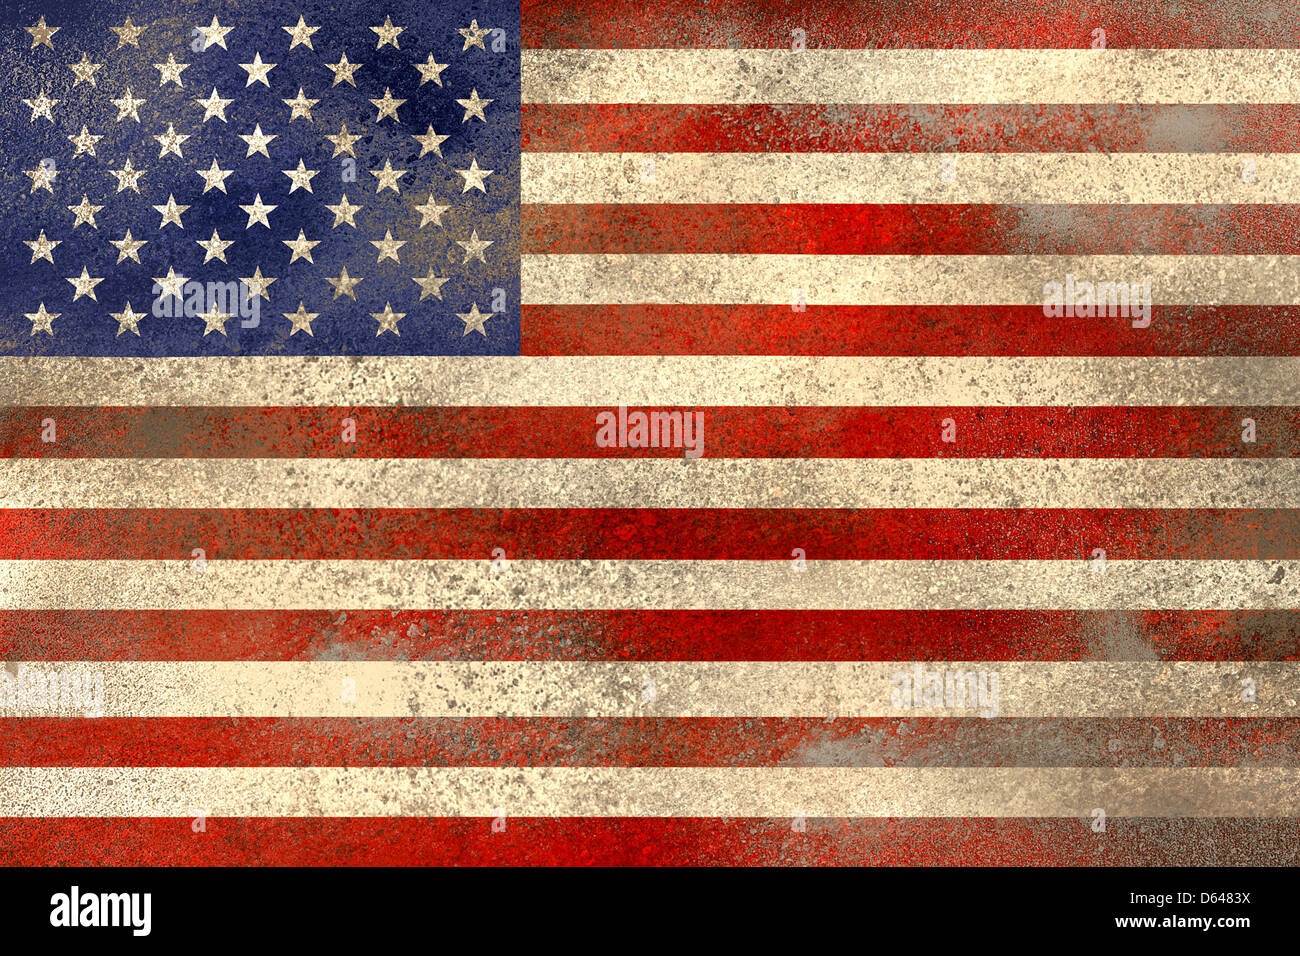 Used and filthy US flag Stock Photo